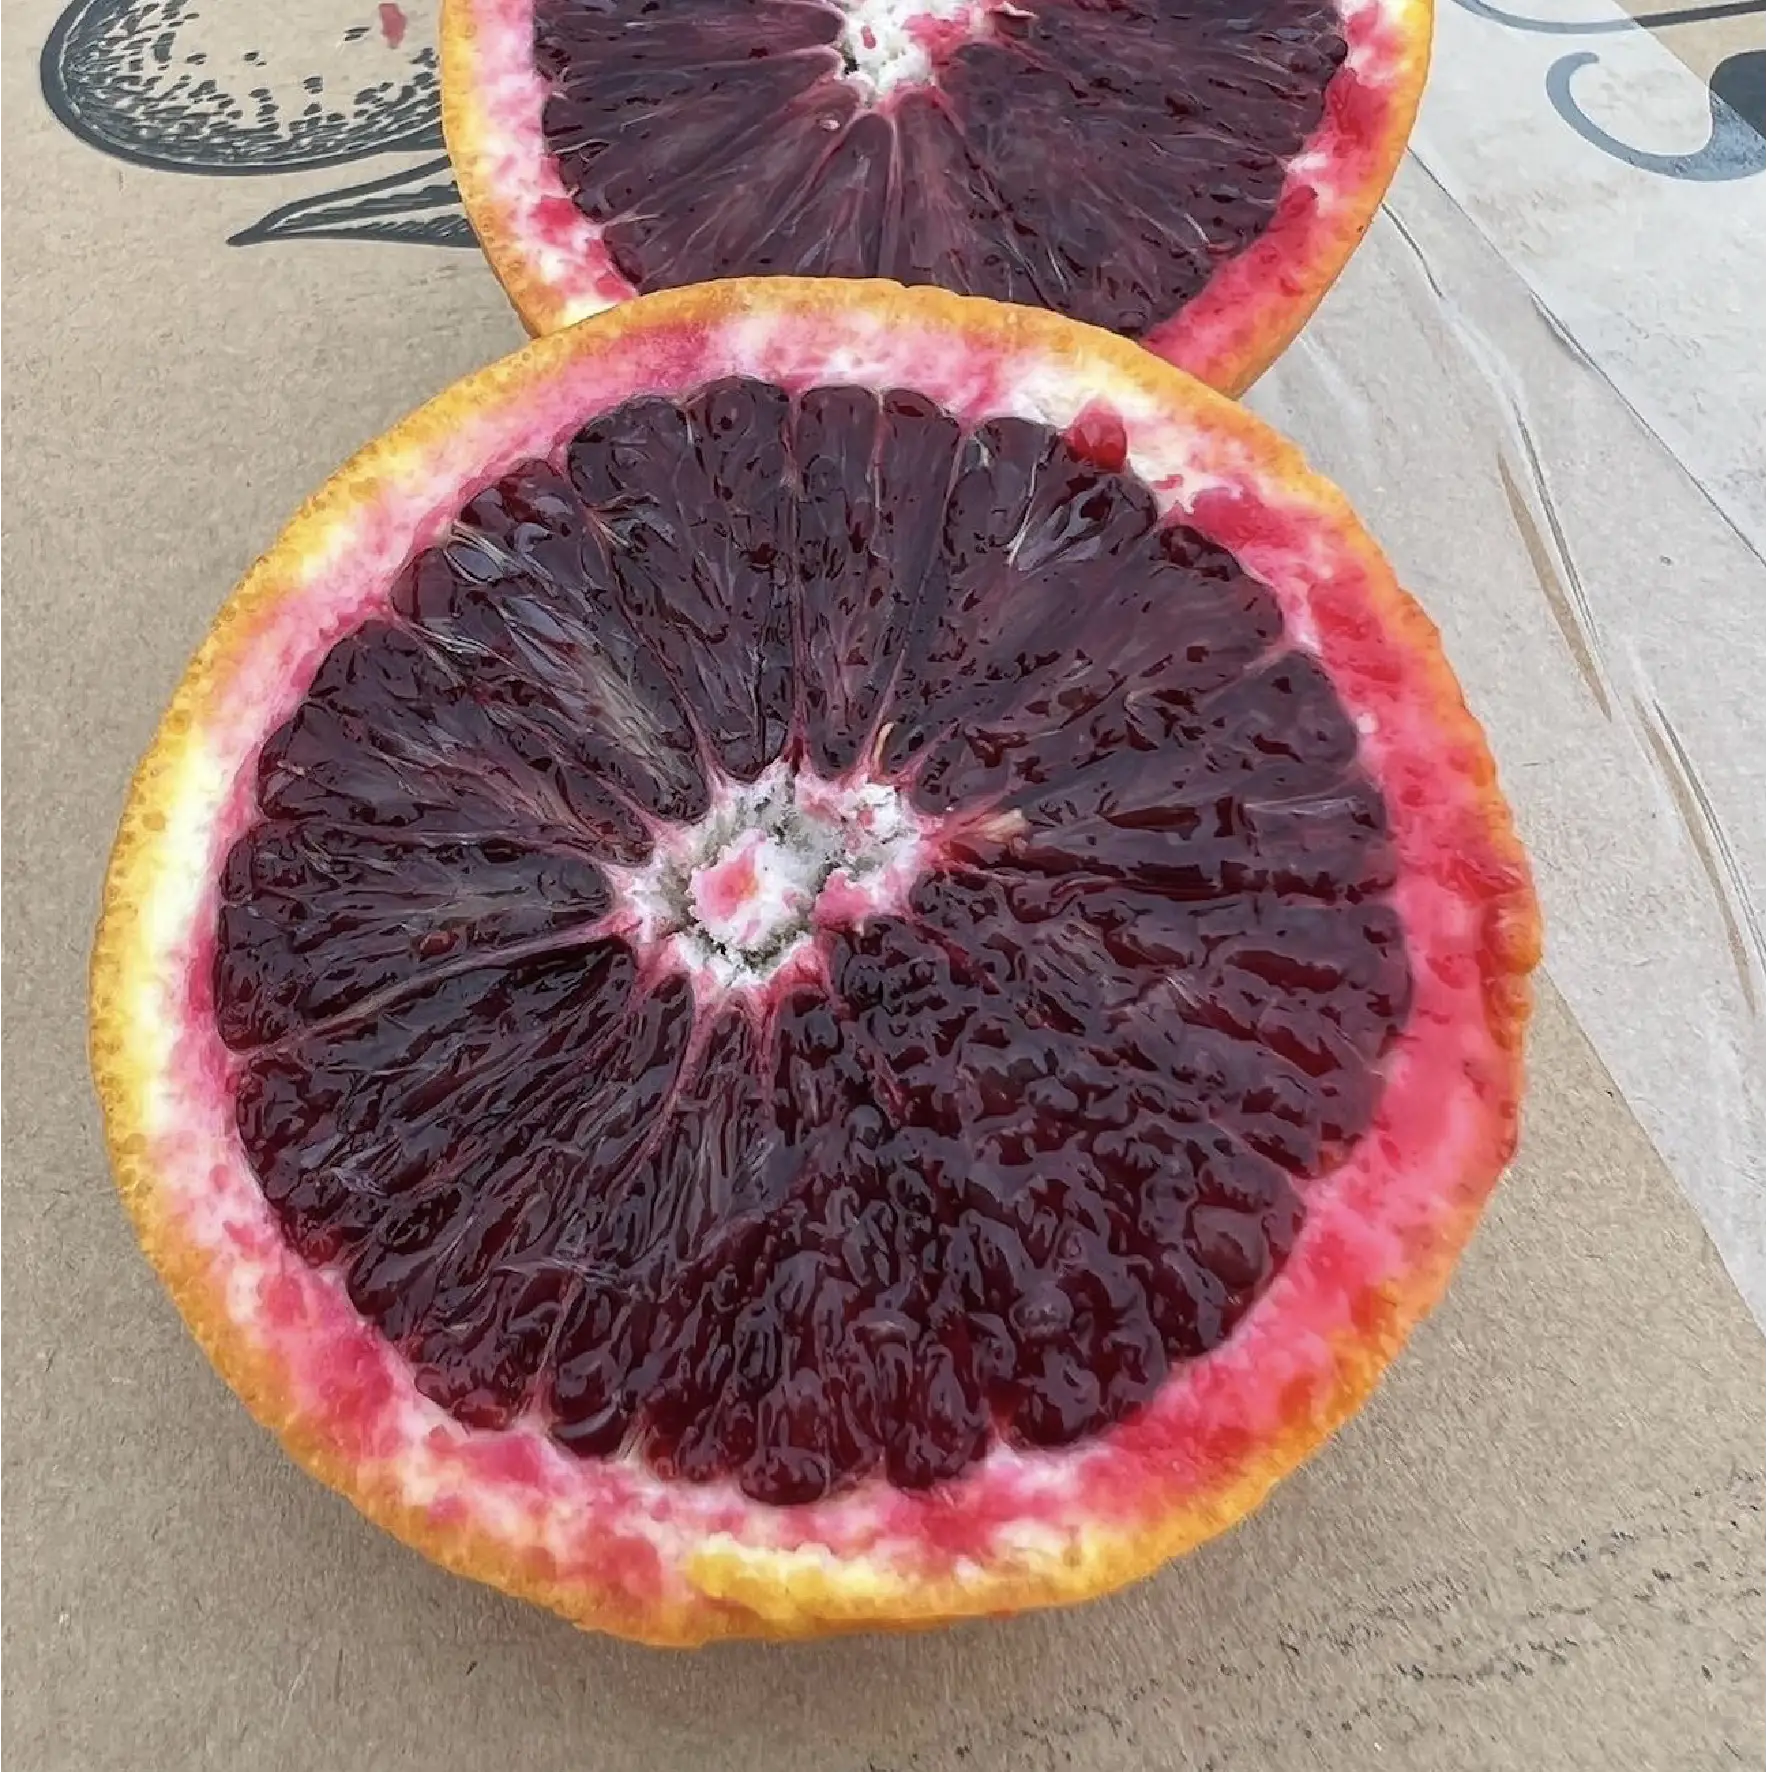 Tarocco Blood Oranges - Galpin Family Farms Delivery